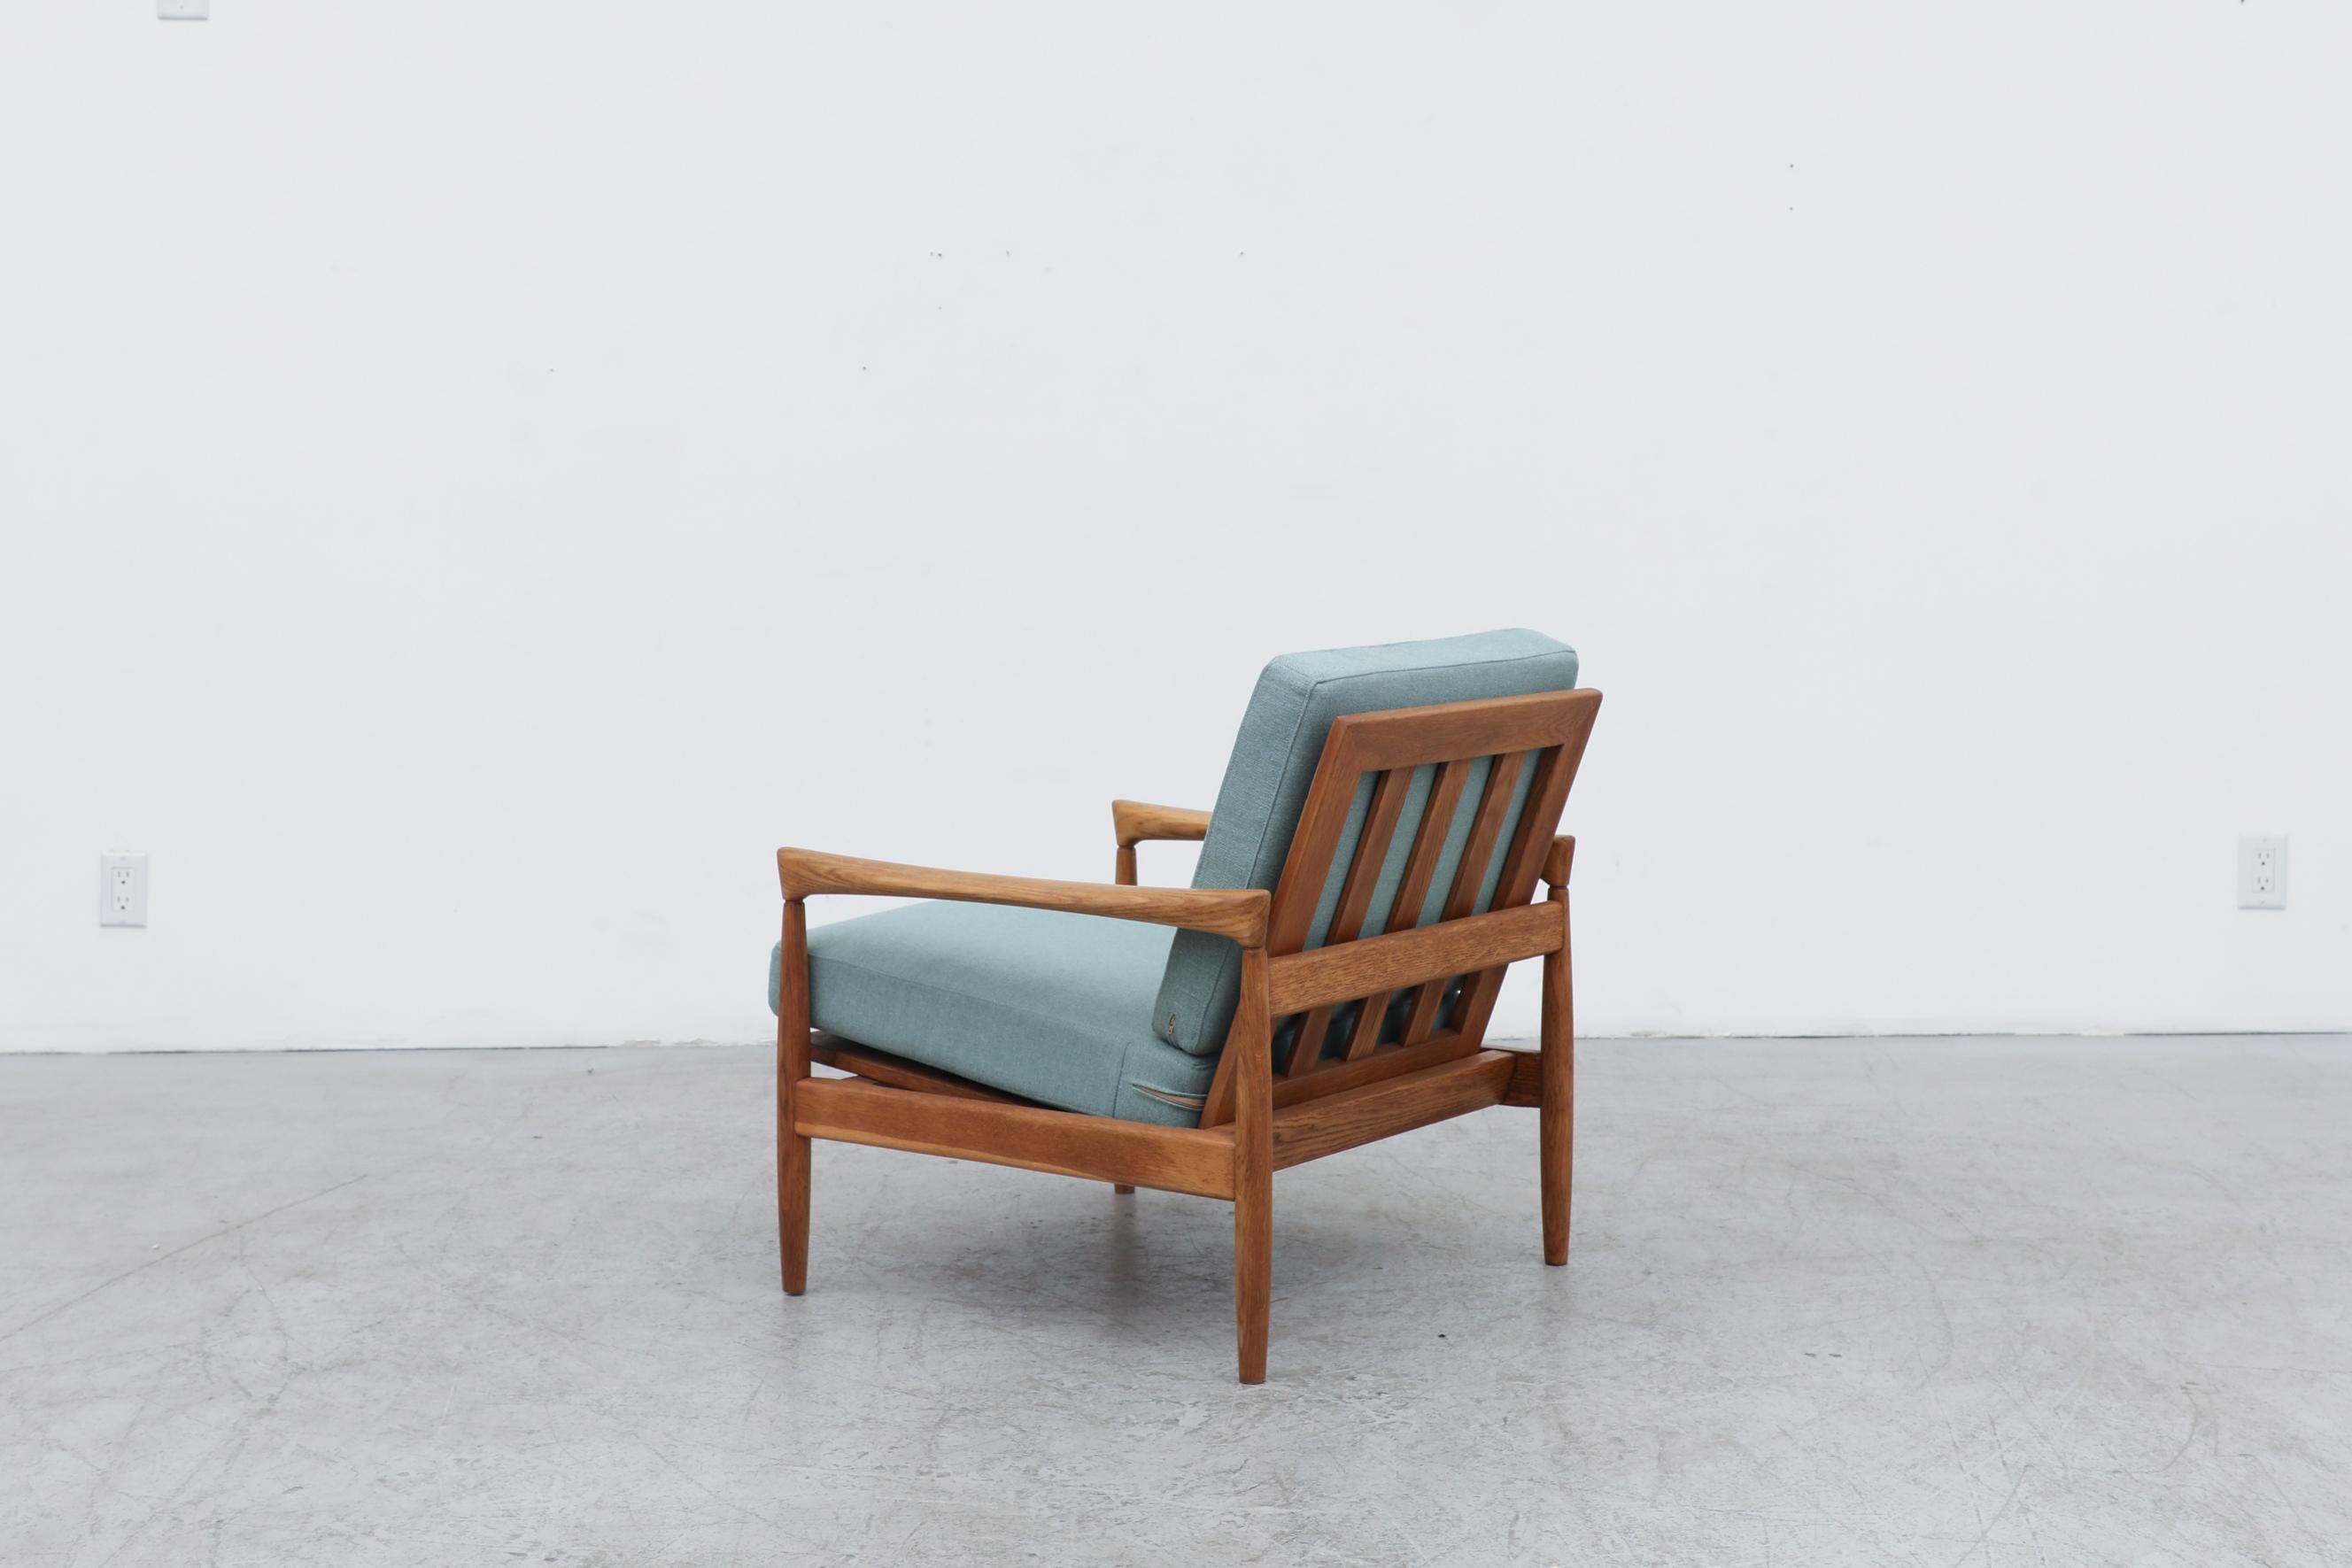 Mid-20th Century Danish Oak Lounge Chair with Robins Egg Blue Cushions